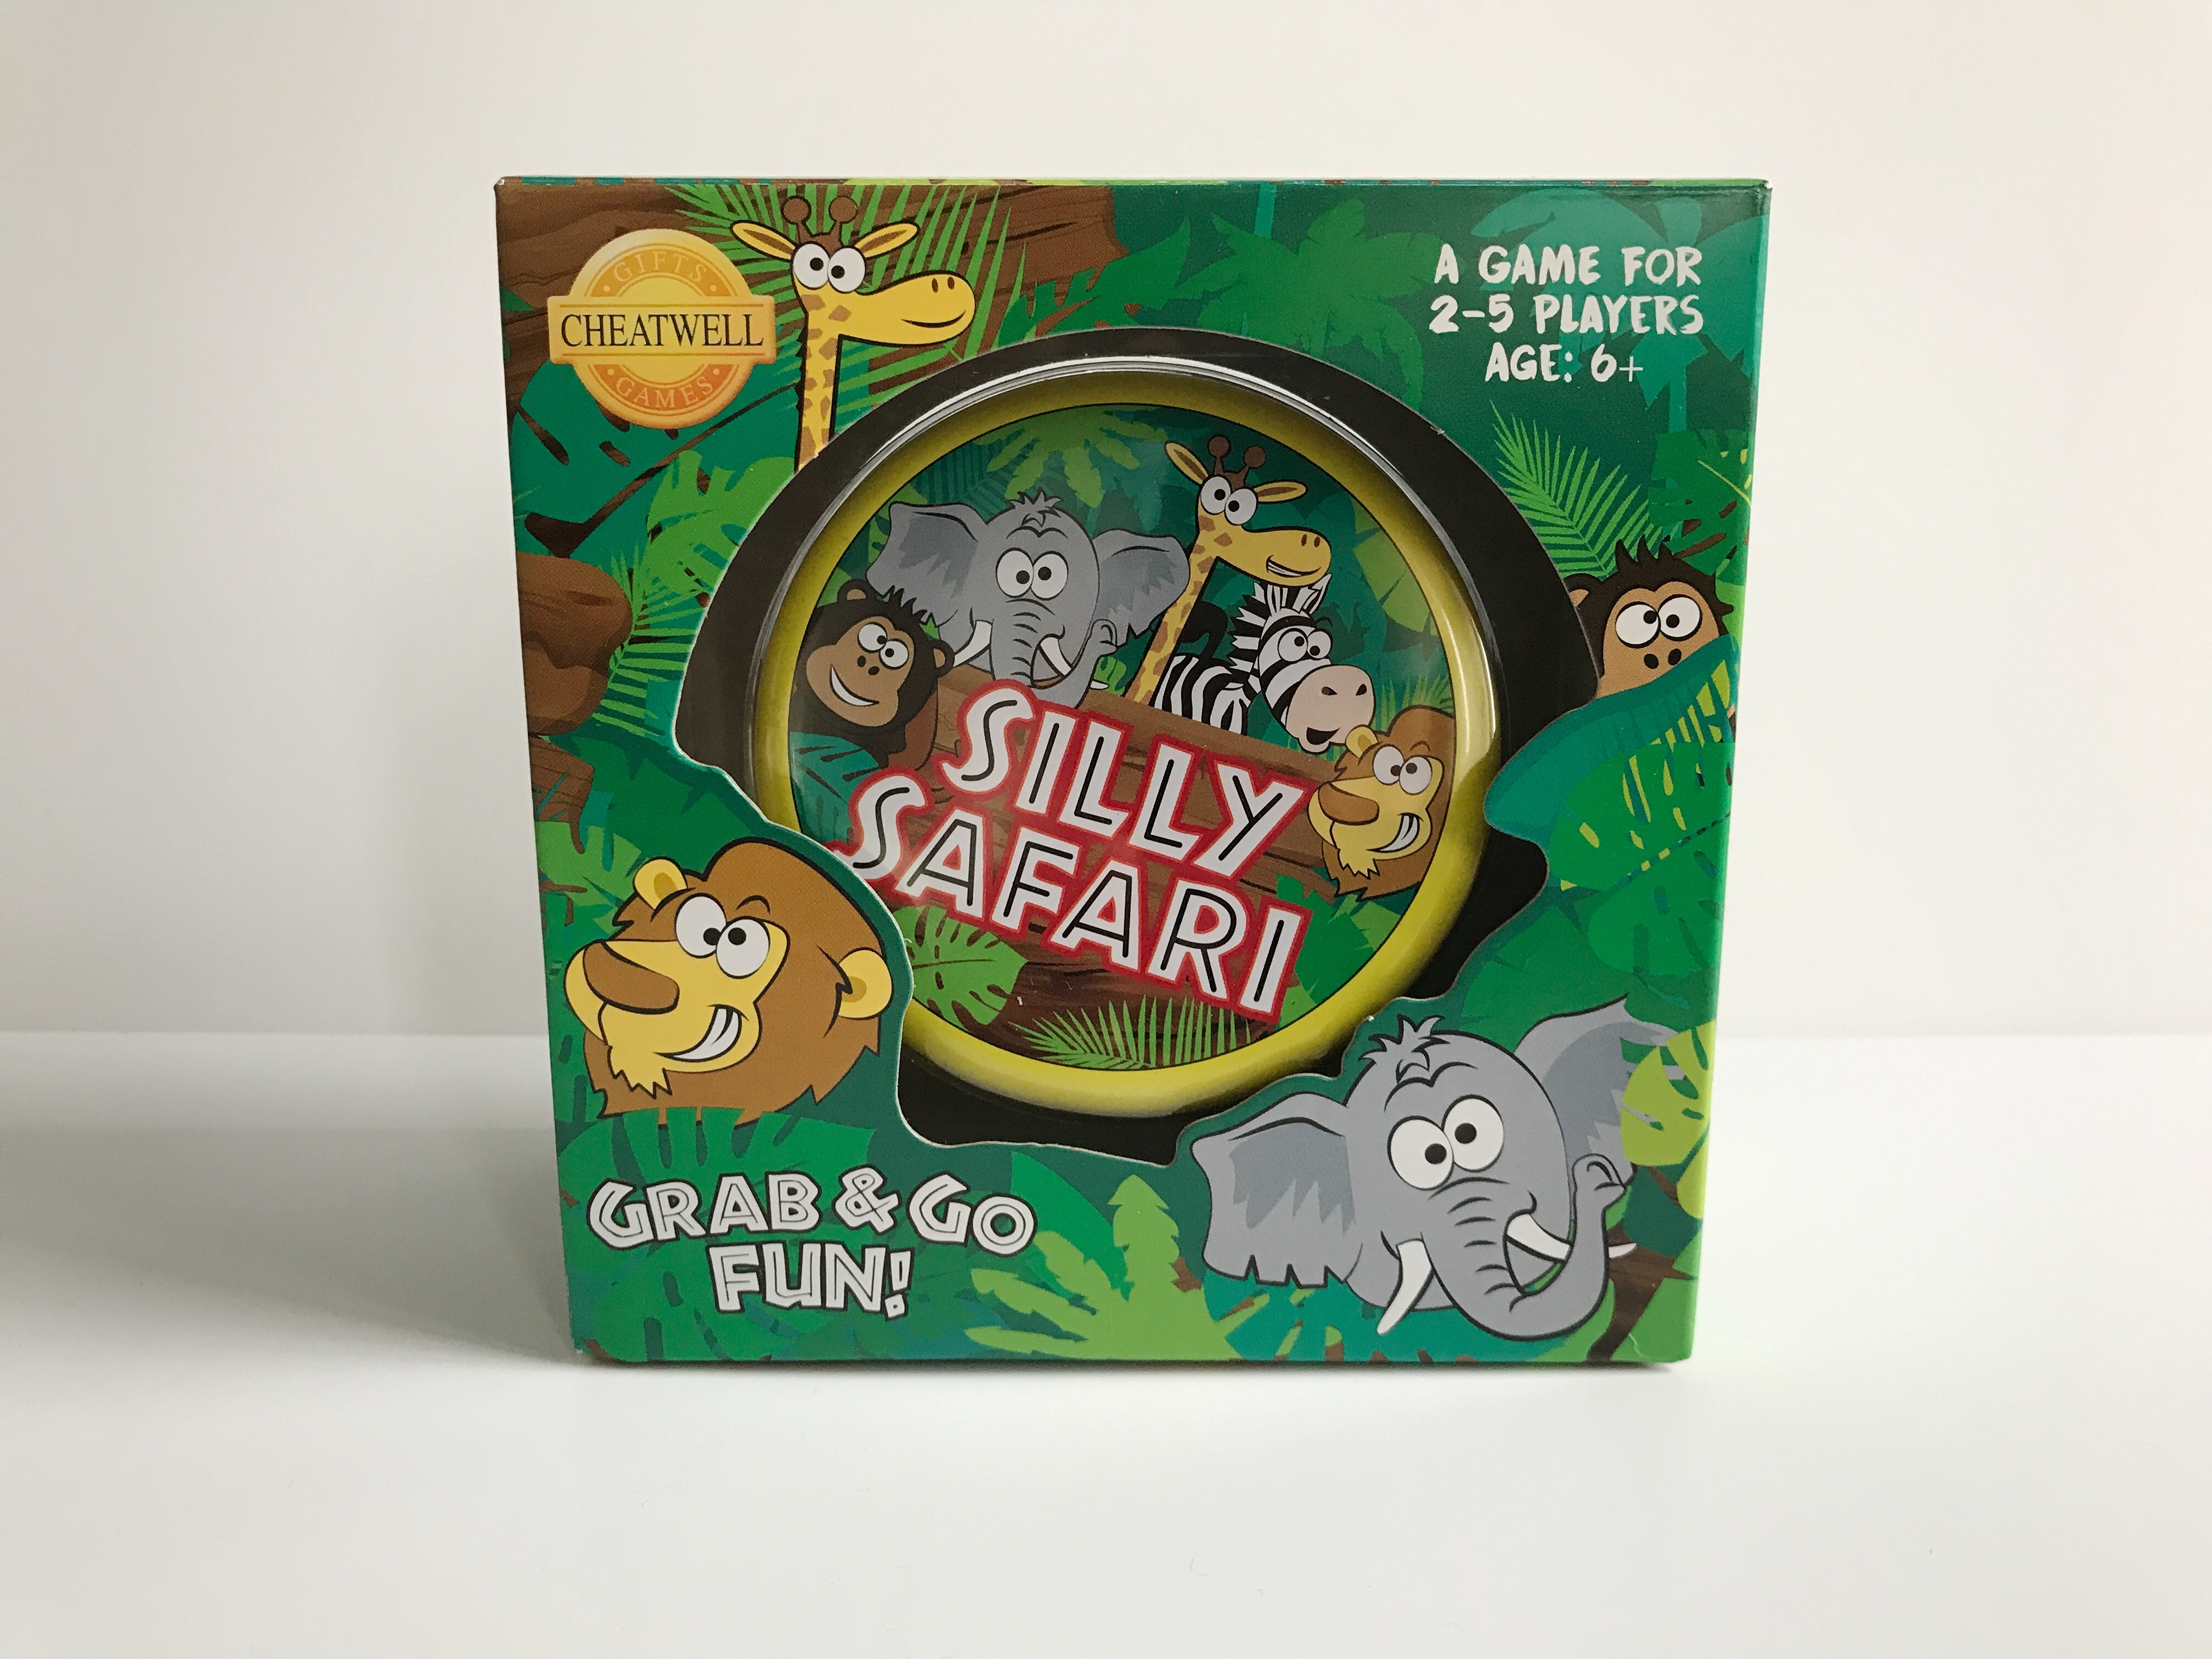 Review: Spin Point & Silly Safari [AD] – The Bear & The Fox